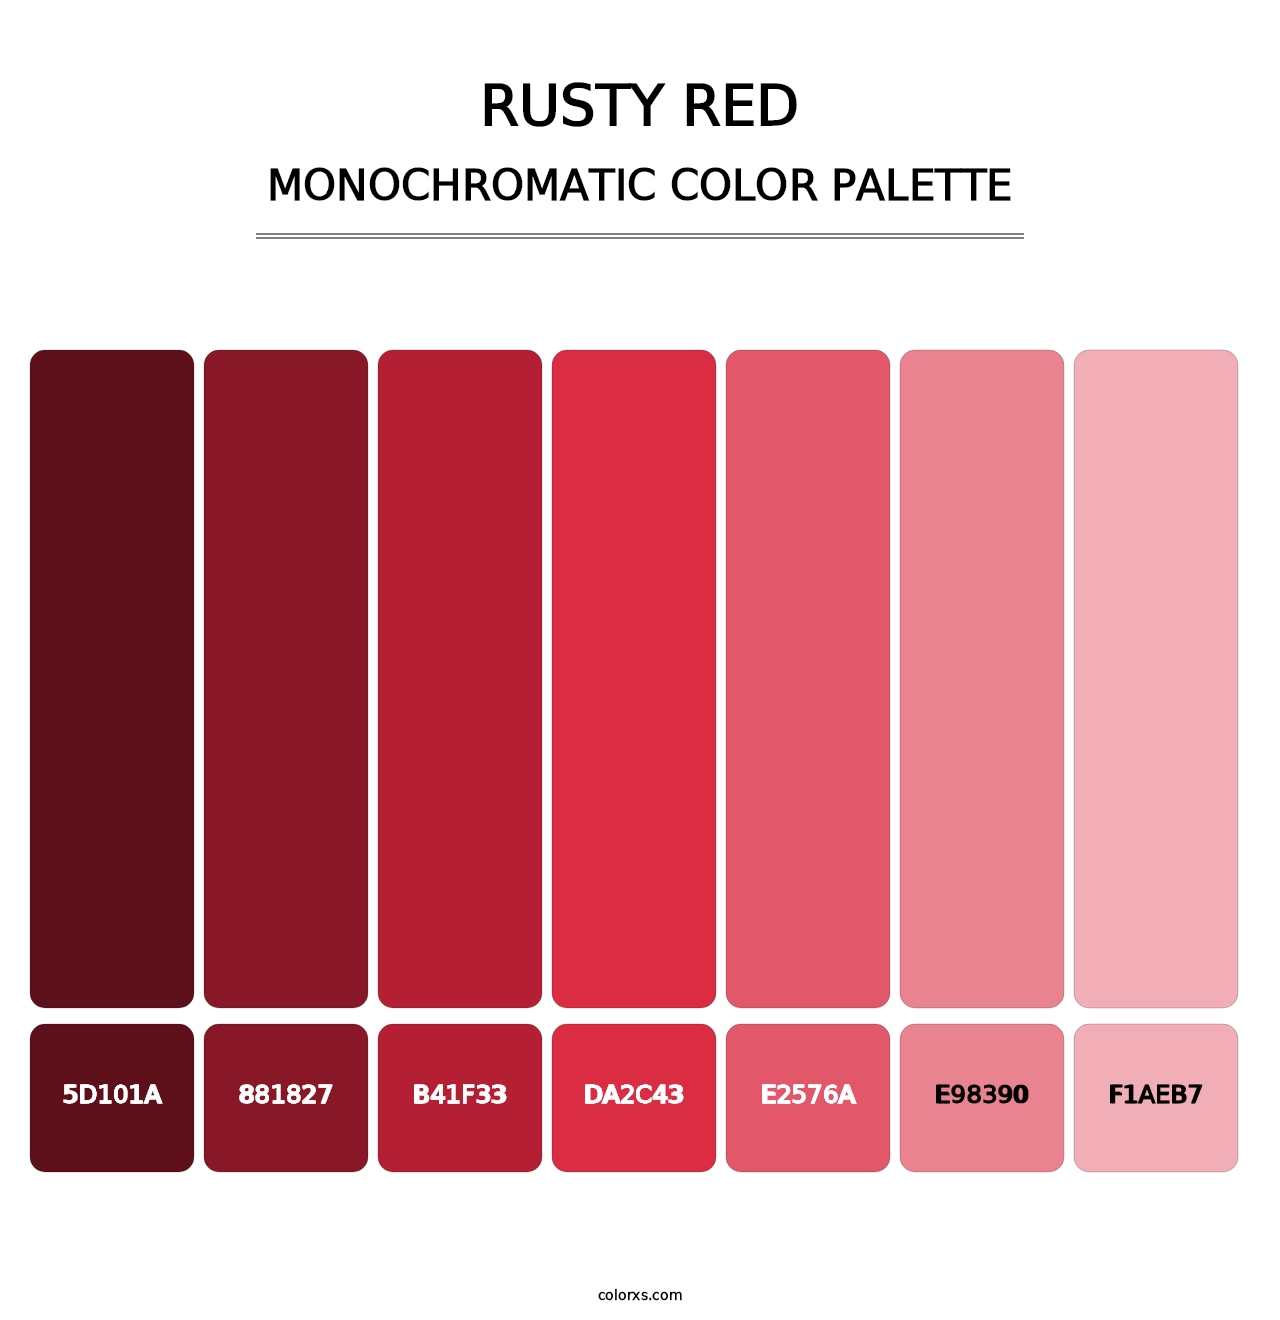 Rusty Red - Monochromatic Color Palette